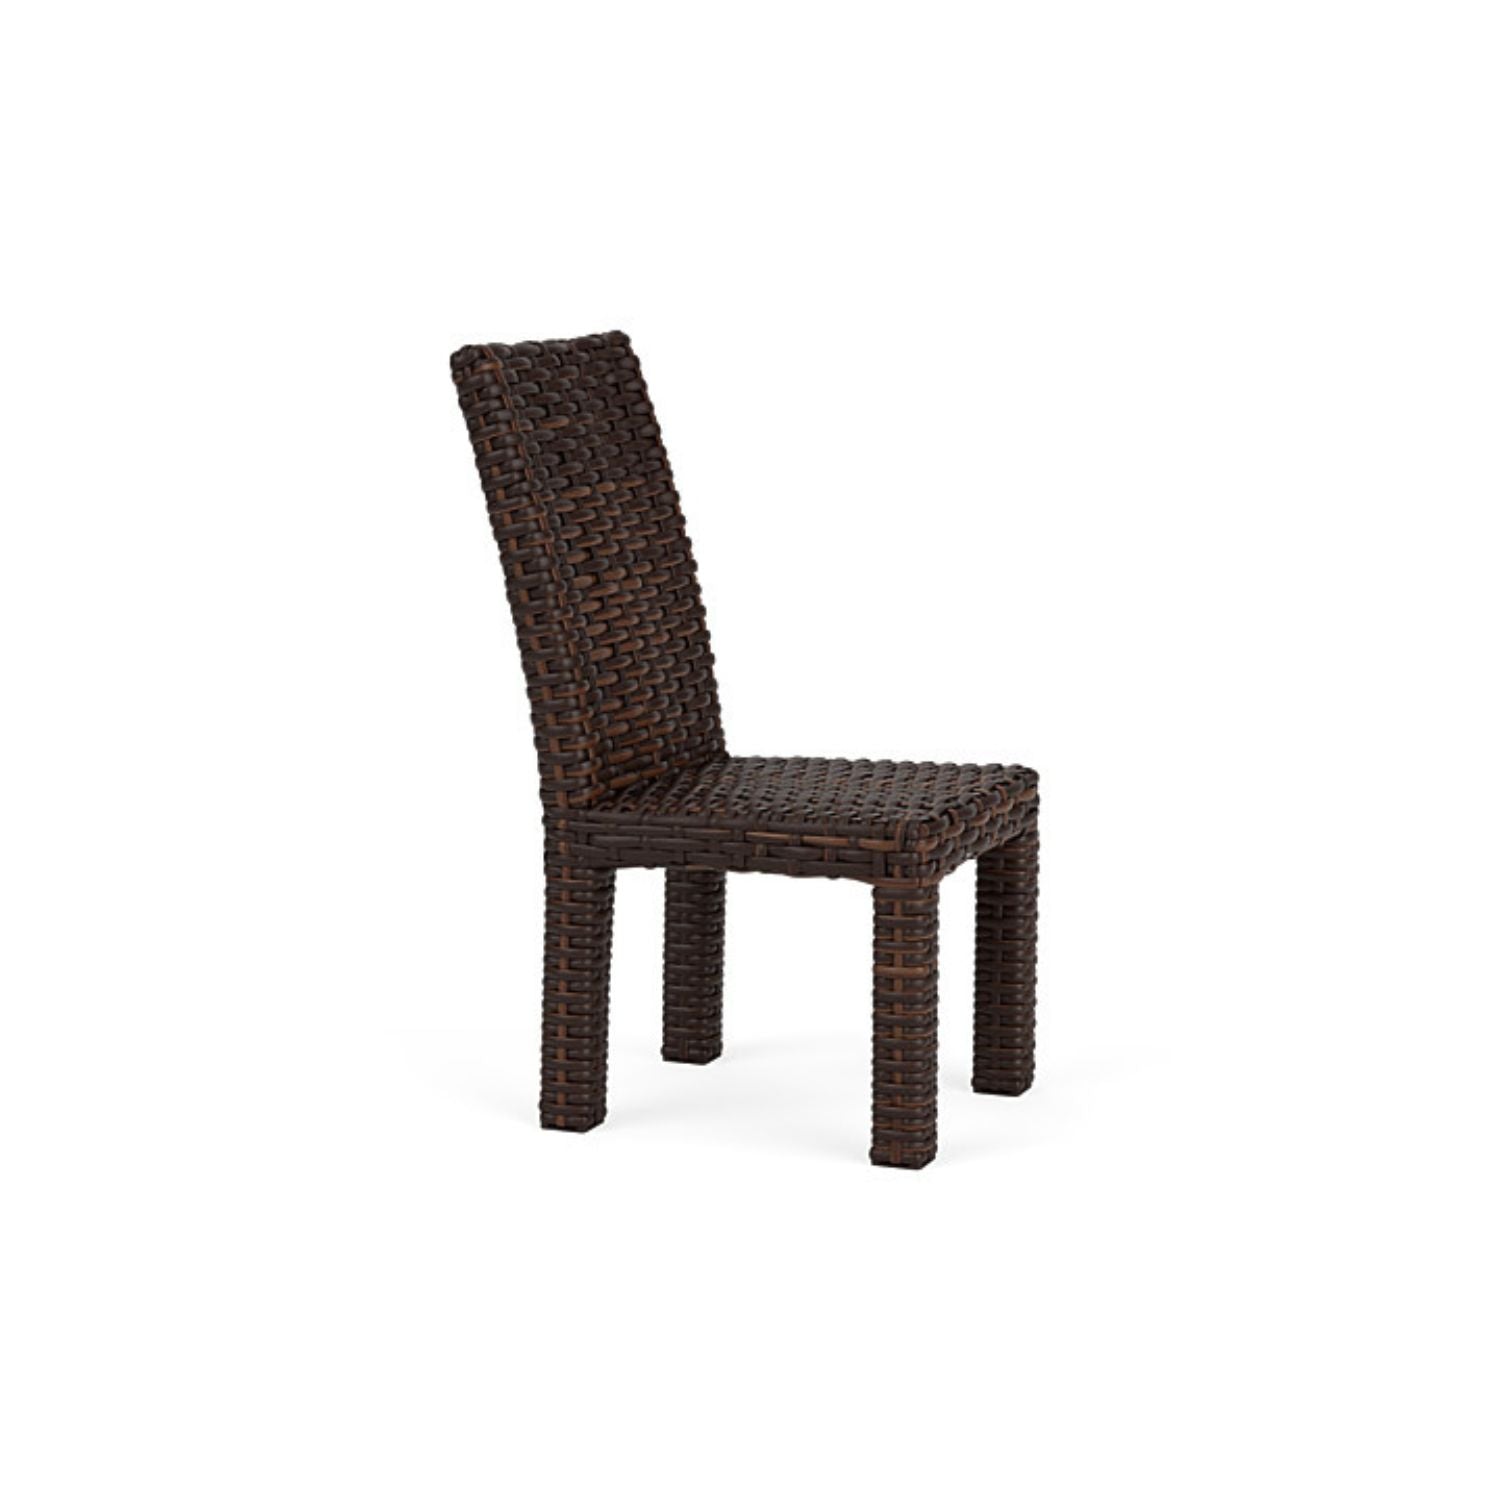 Contempo Armless Dining Chair